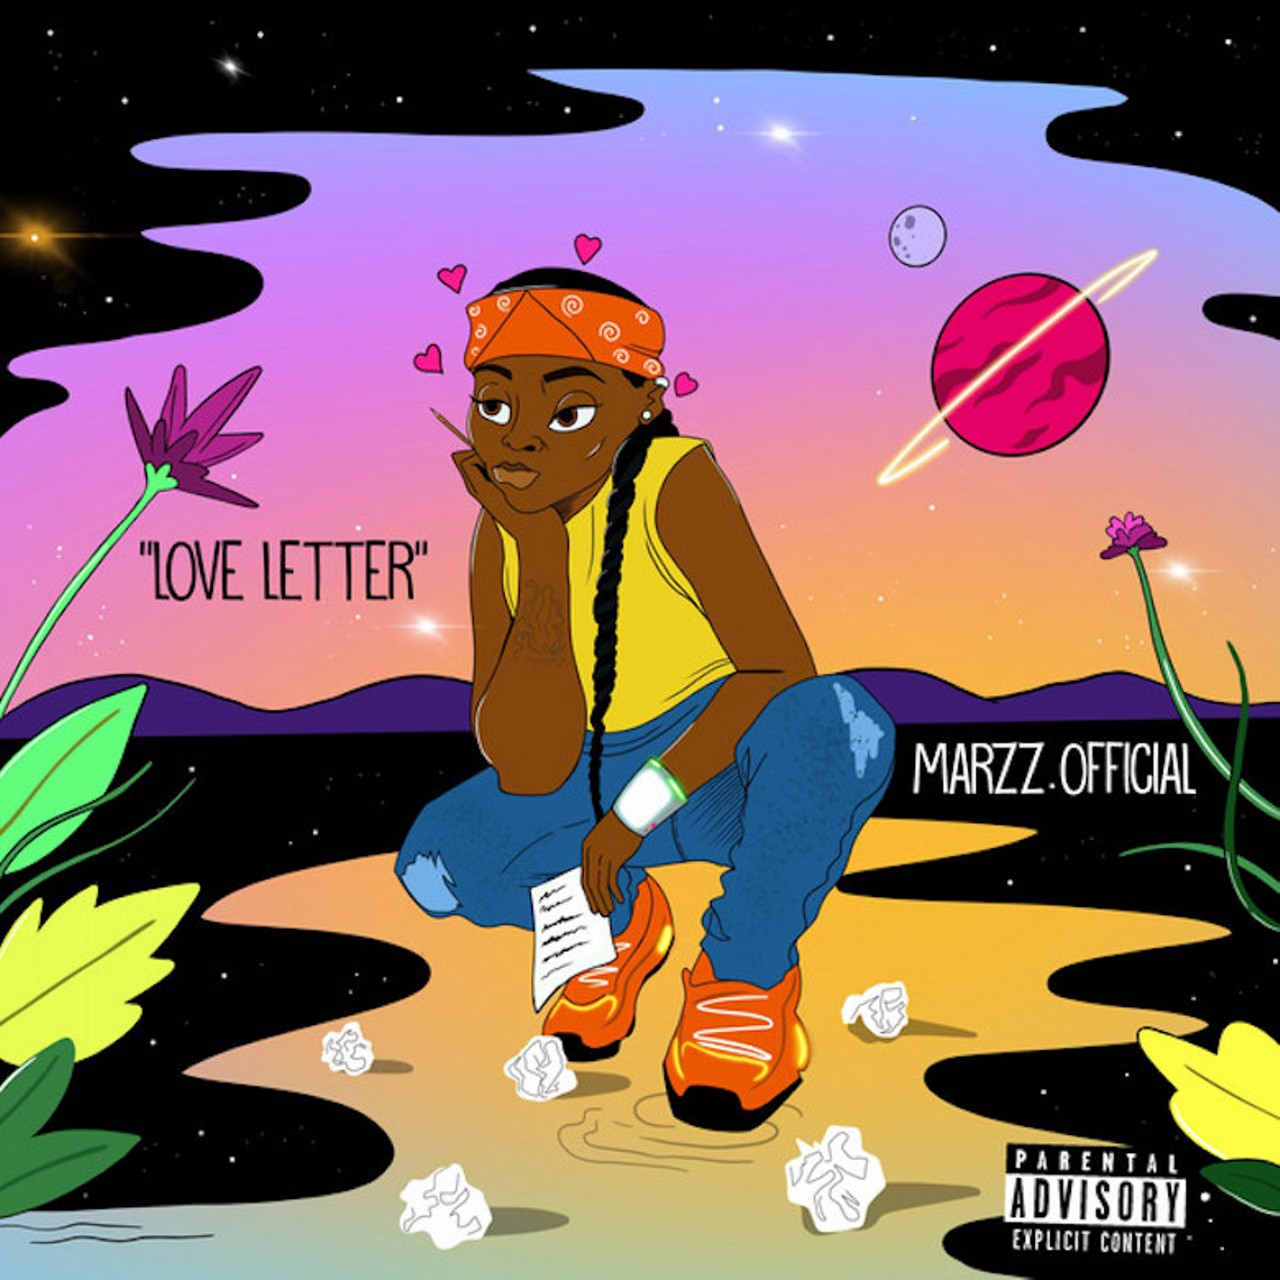 Marzz
Love Letter
Louisville artist Marzz released her EP Love Letterz in the spring of this year, and the two tracks she was most confident would pop were &#147;Cleopatra&#148; and &#147;Countless Times.&#148; But there is a sleeper hit on the album called &#147;Love Letter,&#148; which she recorded five years prior at the age of 16. The song began with a beat she found on YouTube and was recorded in her uncle&#146;s home studio &#151; Marzz&#146;s first time ever in the booth. She explained the delay in releasing the record: &#147;Because that was, like, my first song that I ever wrote, I didn&#146;t really think people would connect to it, but honestly they do.&#148; And how do listeners connect? &#147;They DM me a lot. One lady wrote that she listened to &#145;Love Letter&#146; over and over when she was going through some traumatic relationship things, and it helped her love herself and grow.&#148; &#151;Sarah Kinbar 
Listen on Spotify